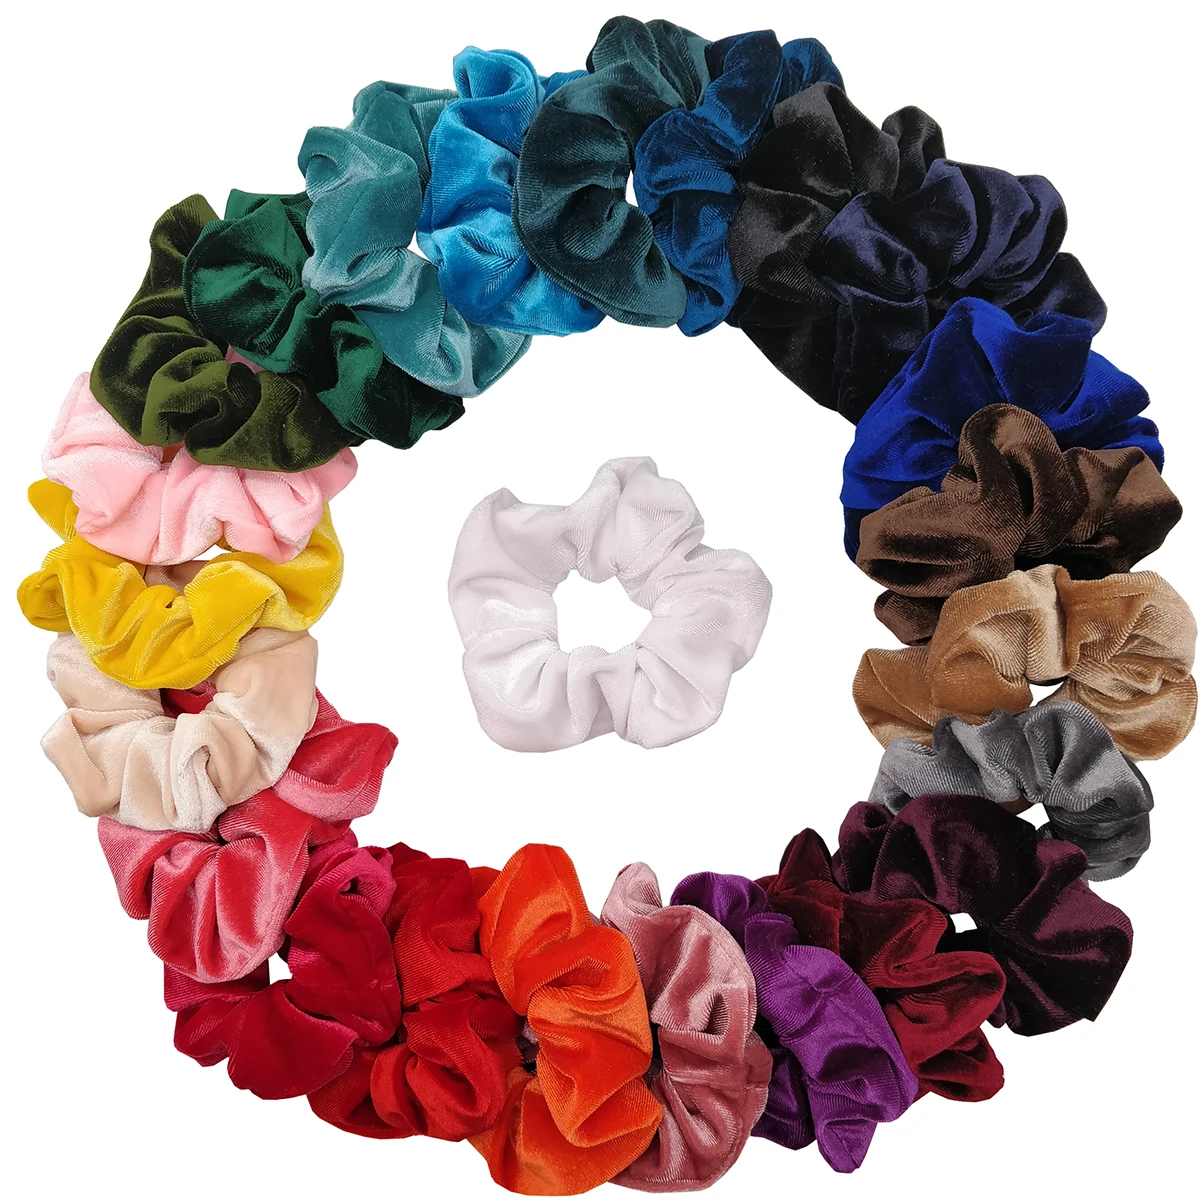 50/40/30pc Winter Soft Hair Scrunchies for Women Girl Plush Elastic Tie Rubber Band Christmas Santa Accessories Fluffy Fake Fur adagirl bikini blue jeans for women fake two pieces shorts denim low wasit knee length pants summer sexy hotsweet girl clubwear